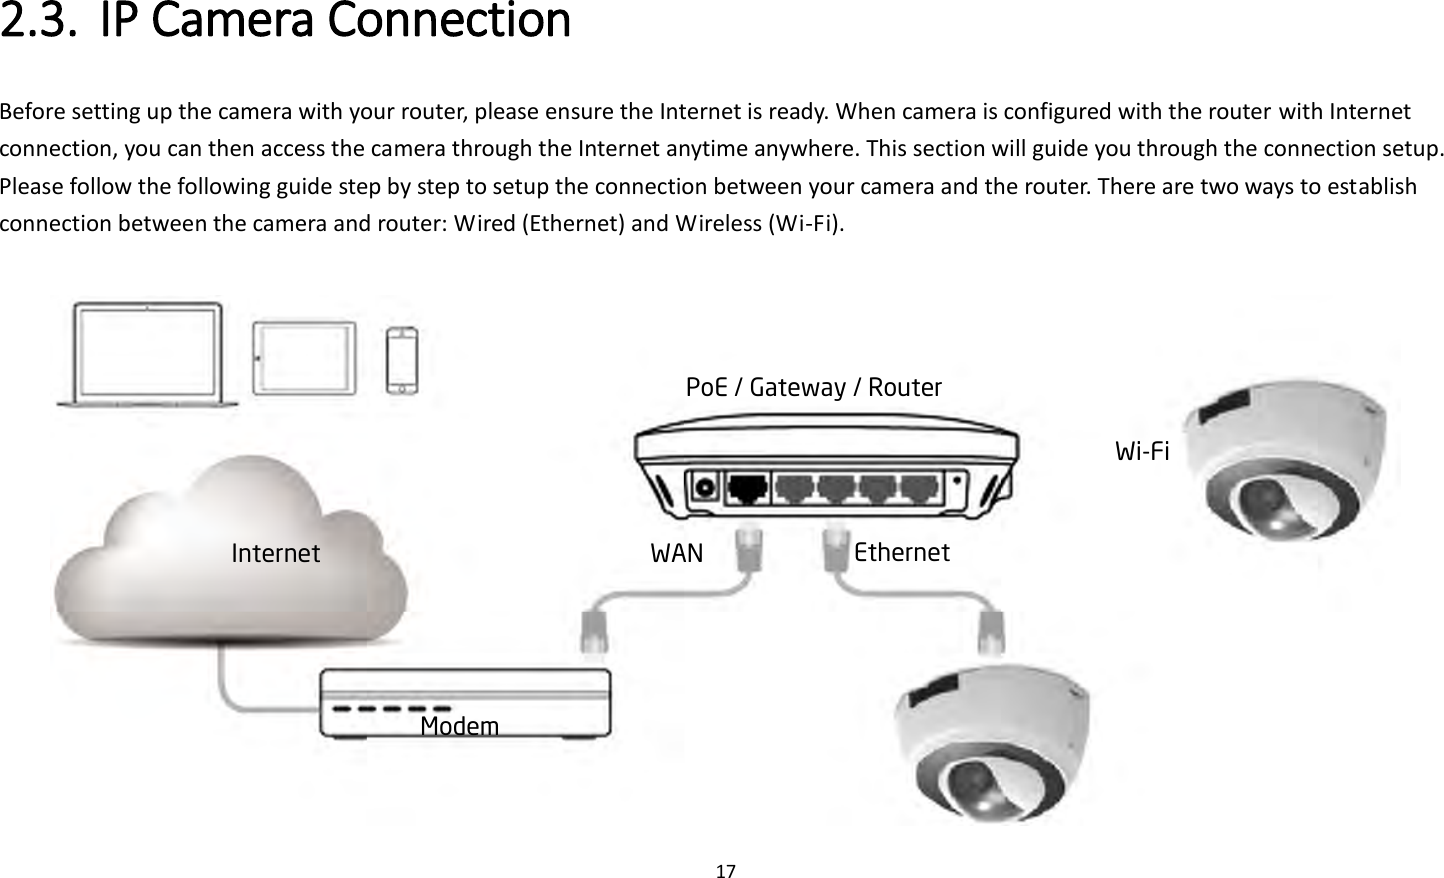 17  2.3. IP Camera Connection   Before setting up the camera with your router, please ensure the Internet is ready. When camera is configured with the router with Internet connection, you can then access the camera through the Internet anytime anywhere. This section will guide you through the connection setup. Please follow the following guide step by step to setup the connection between your camera and the router. There are two ways to establish connection between the camera and router: Wired (Ethernet) and Wireless (Wi-Fi).     PoE / Gateway / Router Modem Internet WAN Ethernet Wi-Fi 